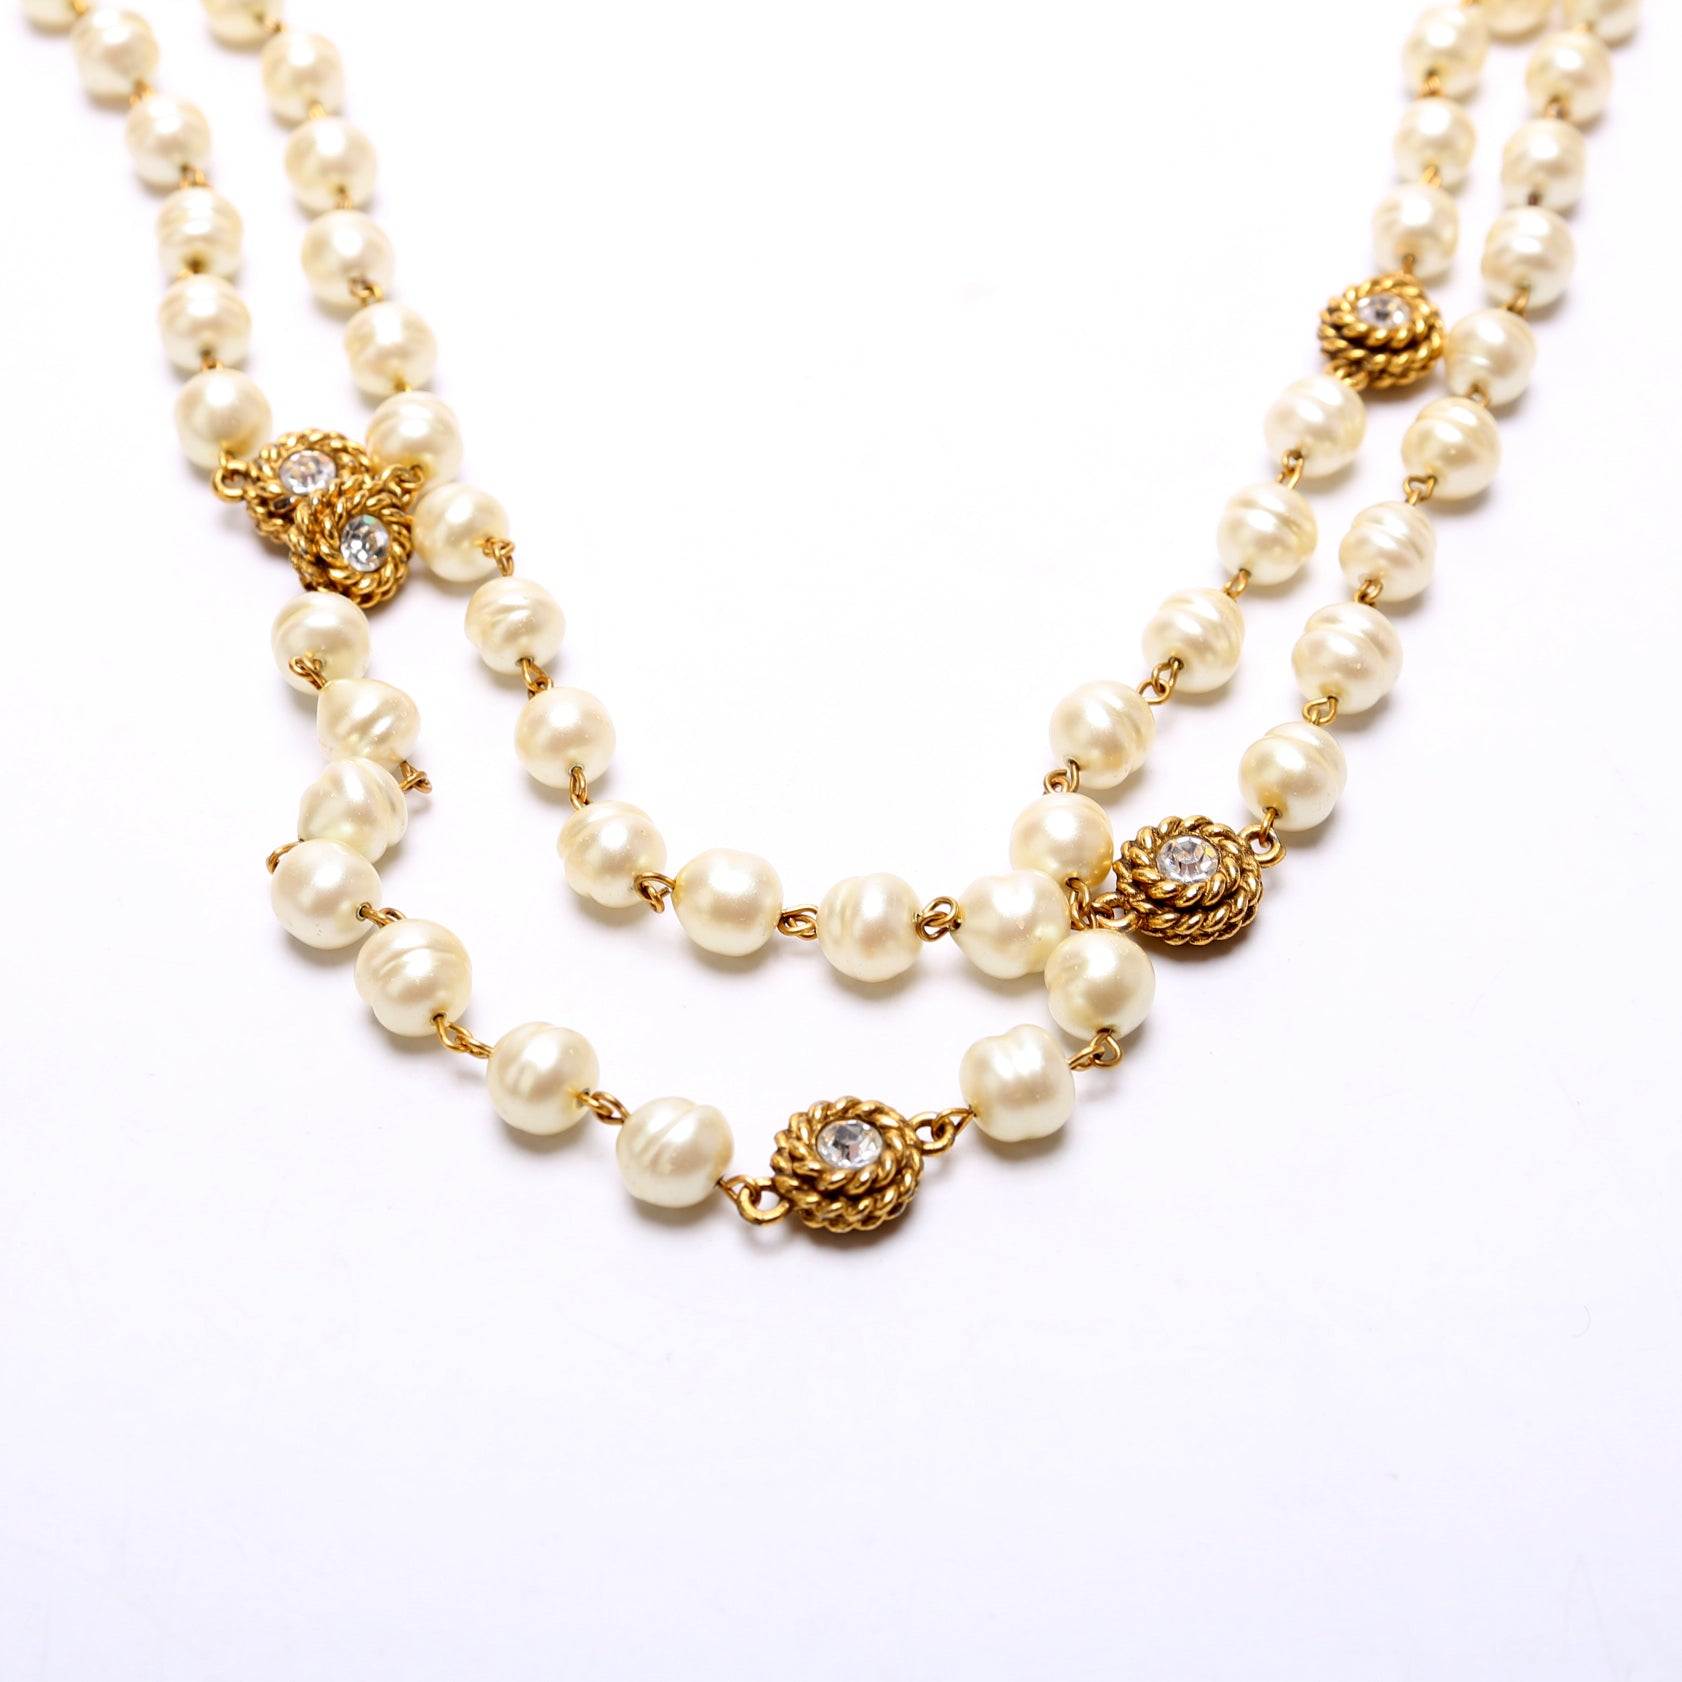 Faux Pearl and Crystal Long Wrap Necklace Vintage